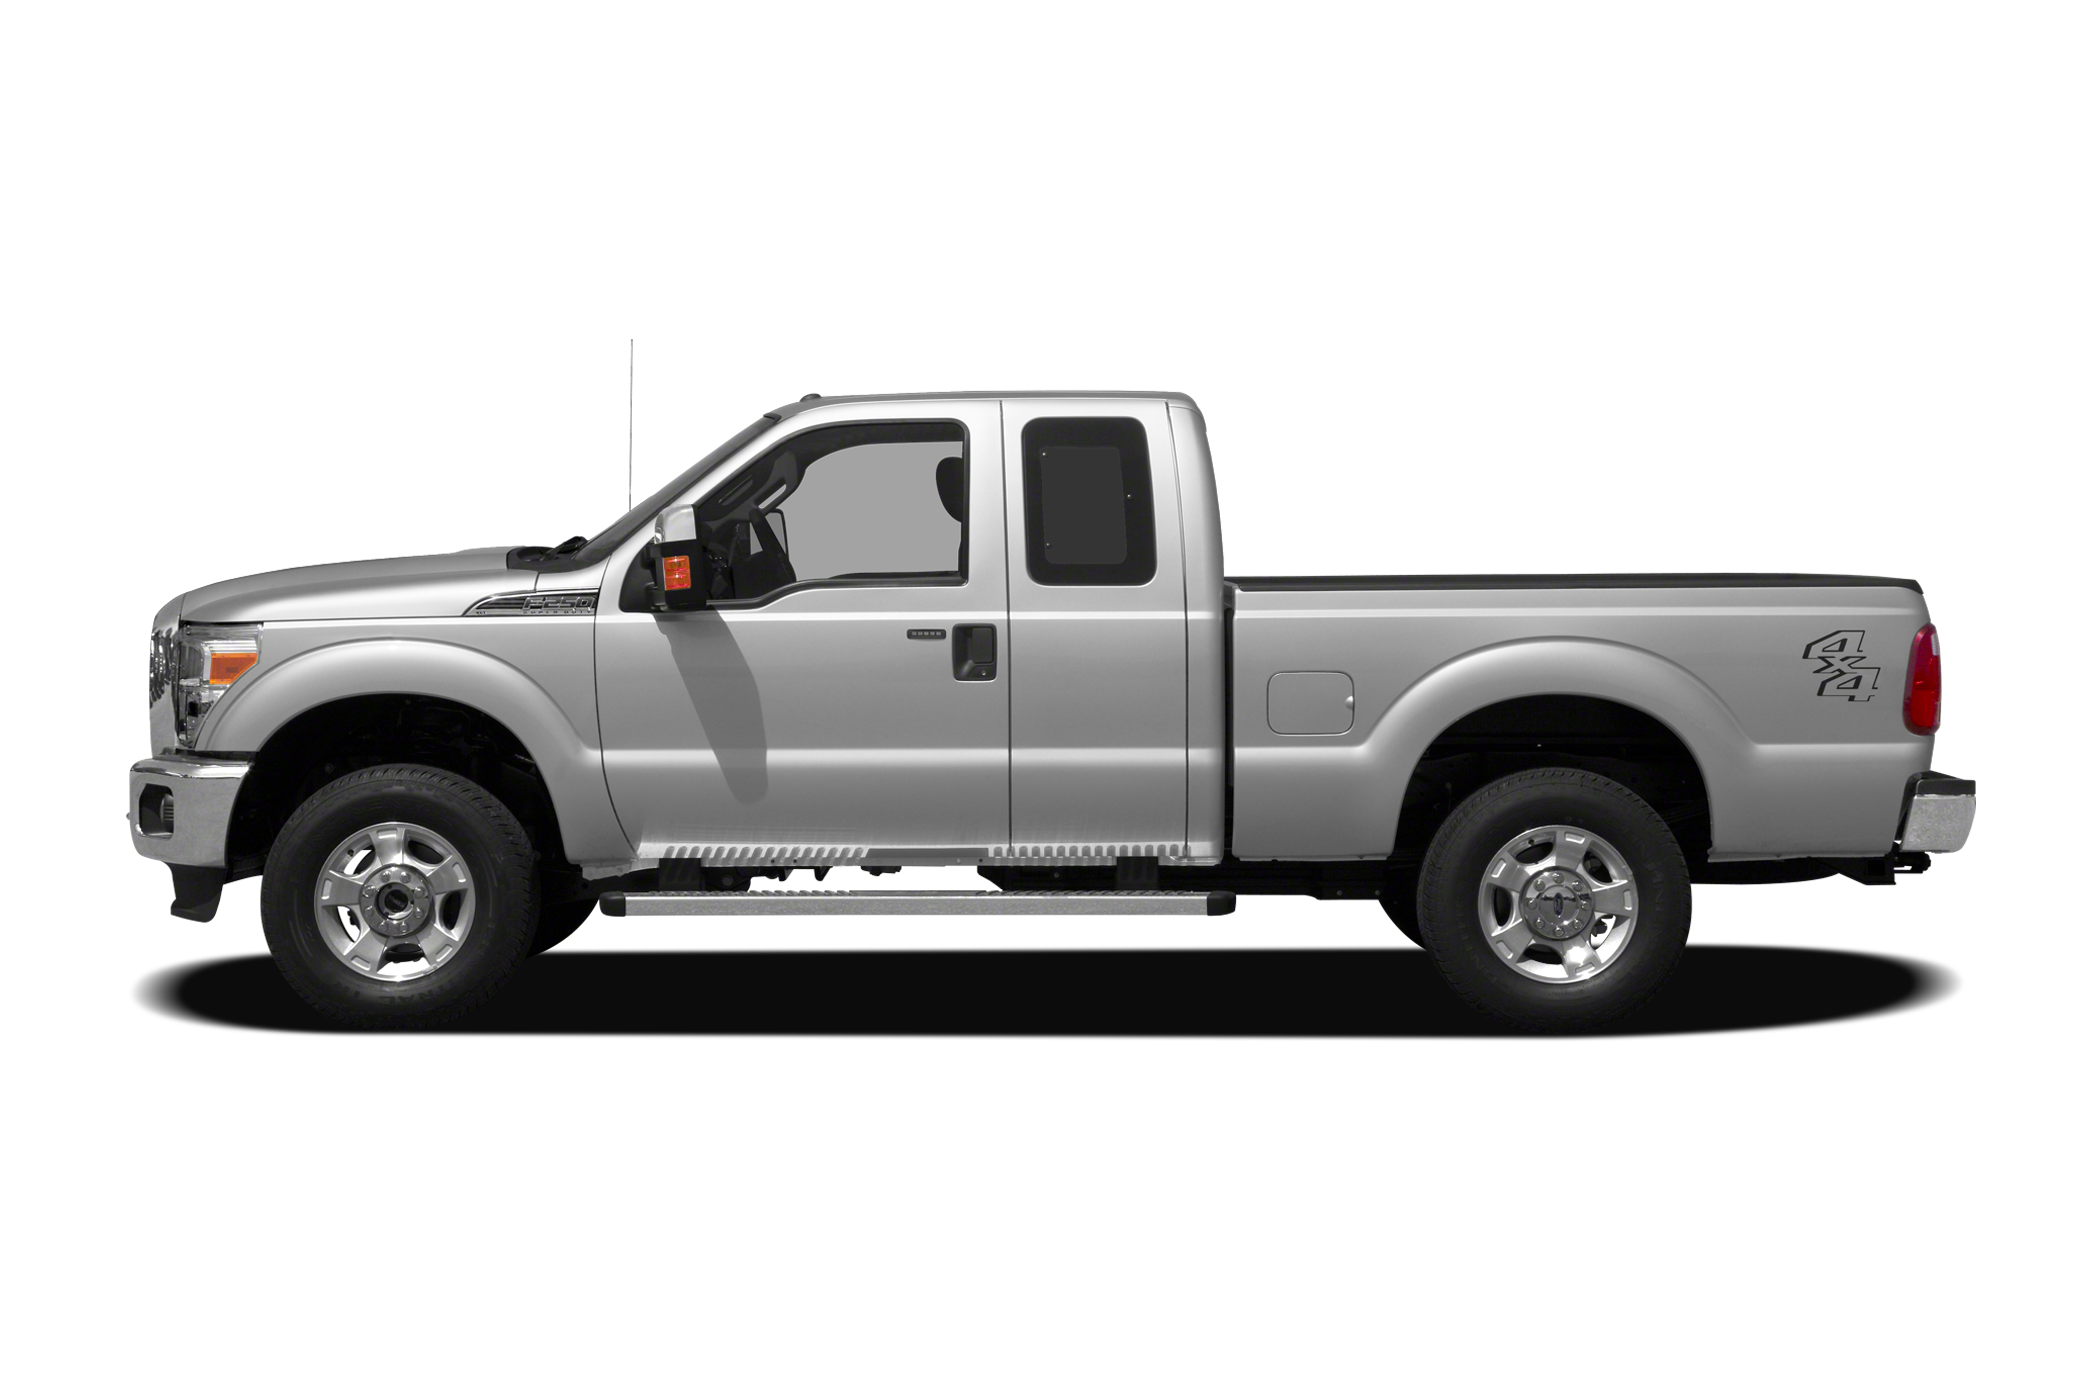 2011 Ford F-250